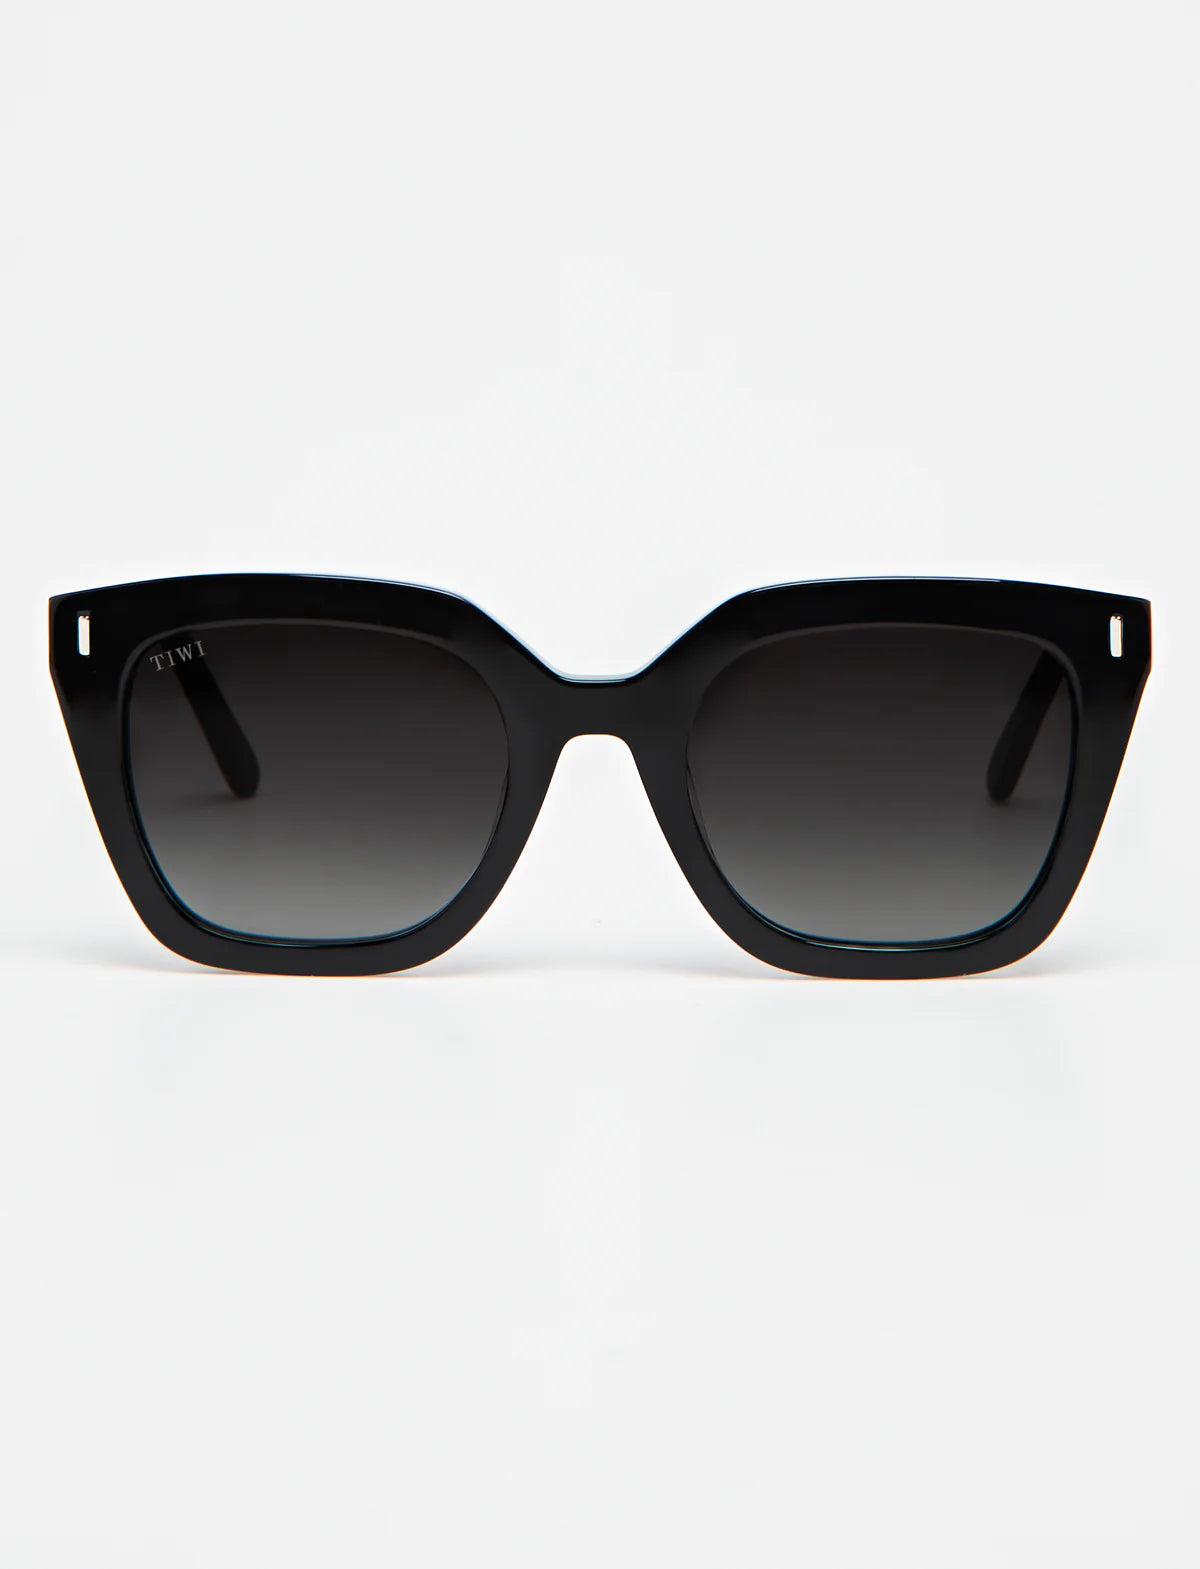 Limited Edition - Collection 1/300 Sunglasses TIWI USA Hale Black Limited Edition 1/300  